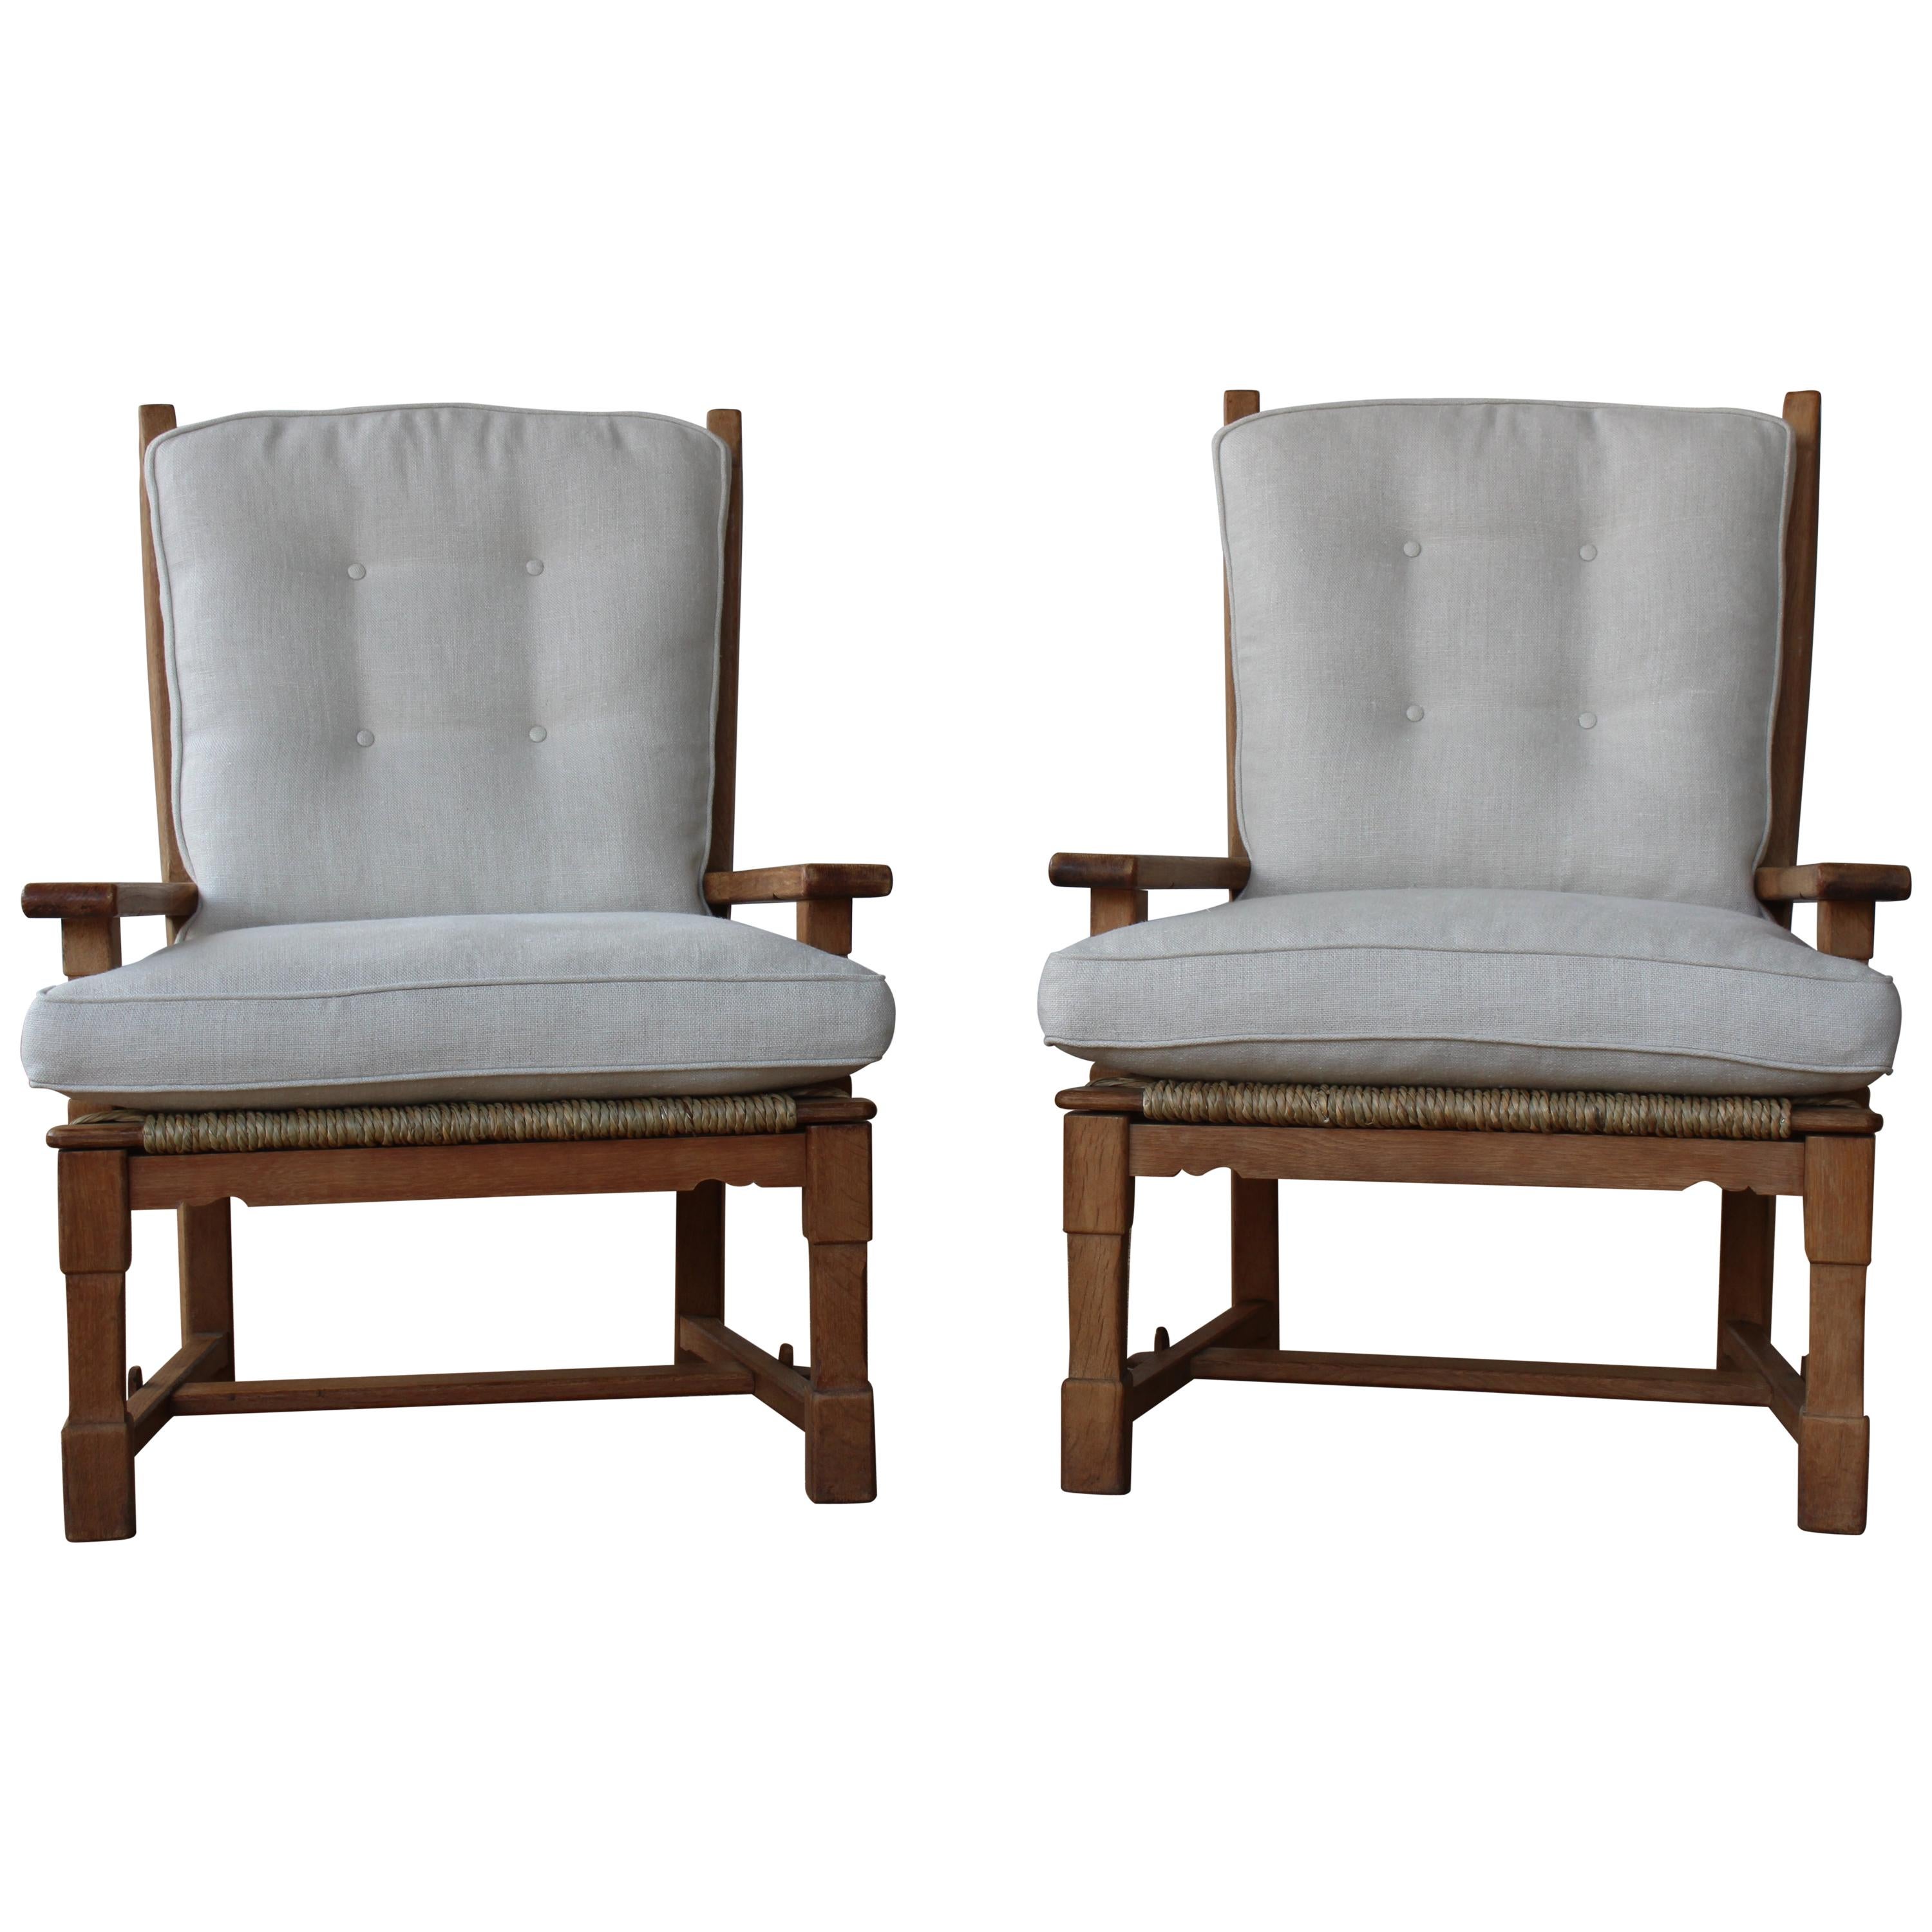 Pair of Oak and Seagrass Chairs, France, 1950s